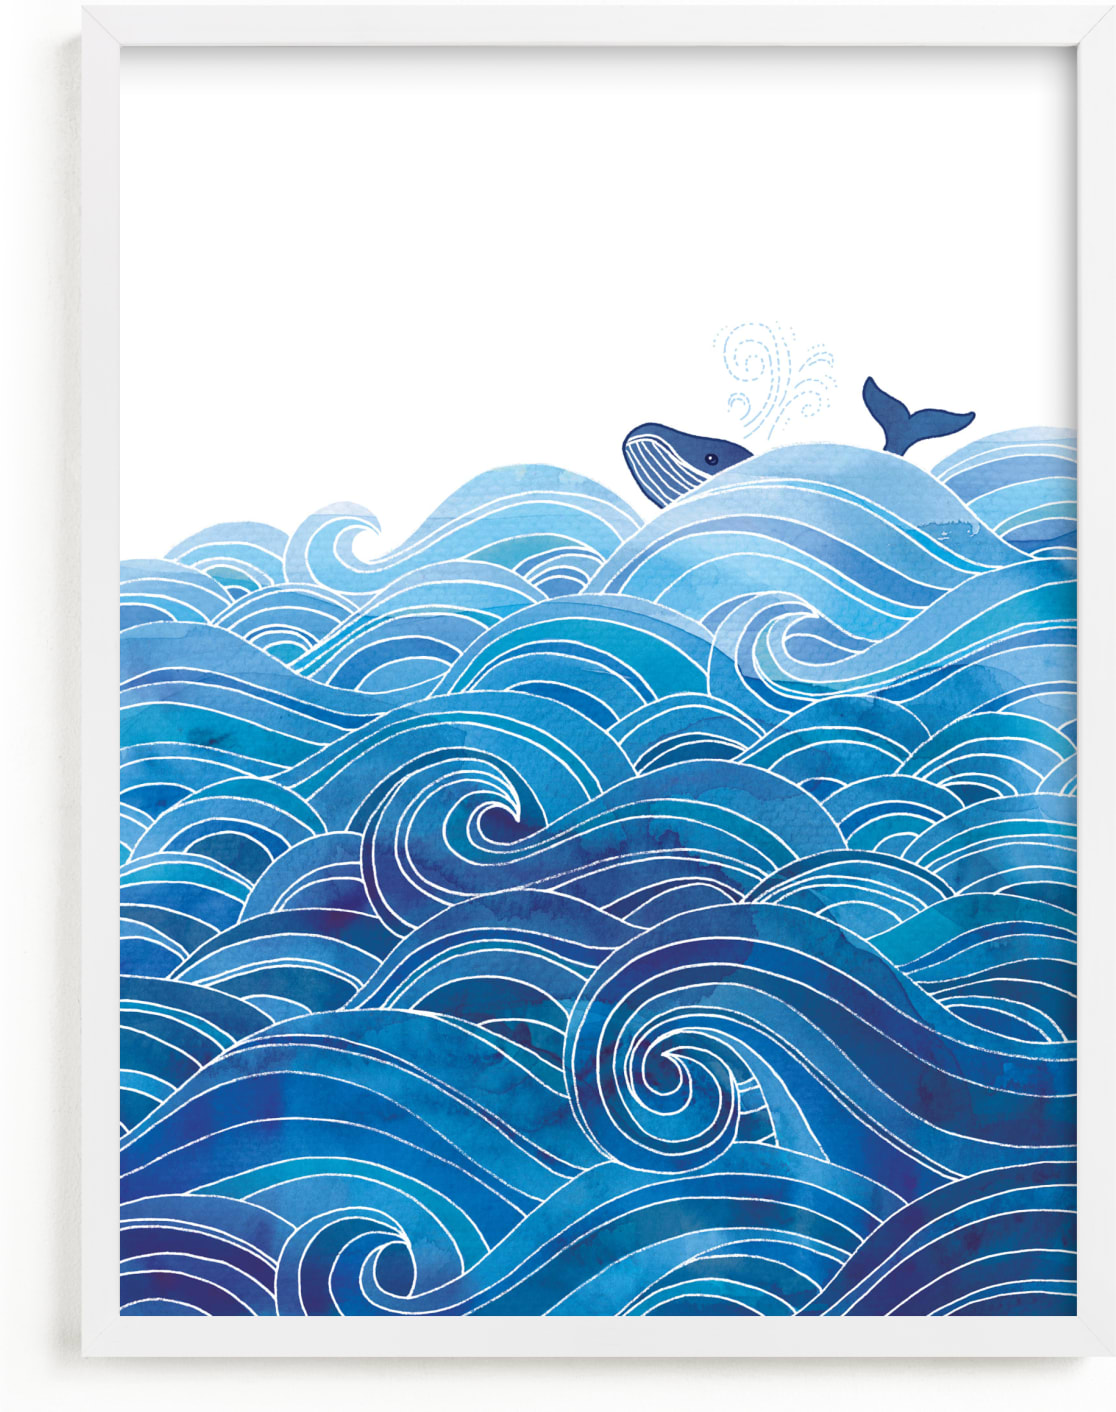 This is a blue kids wall art by Stardust Design Studio called seas the day.